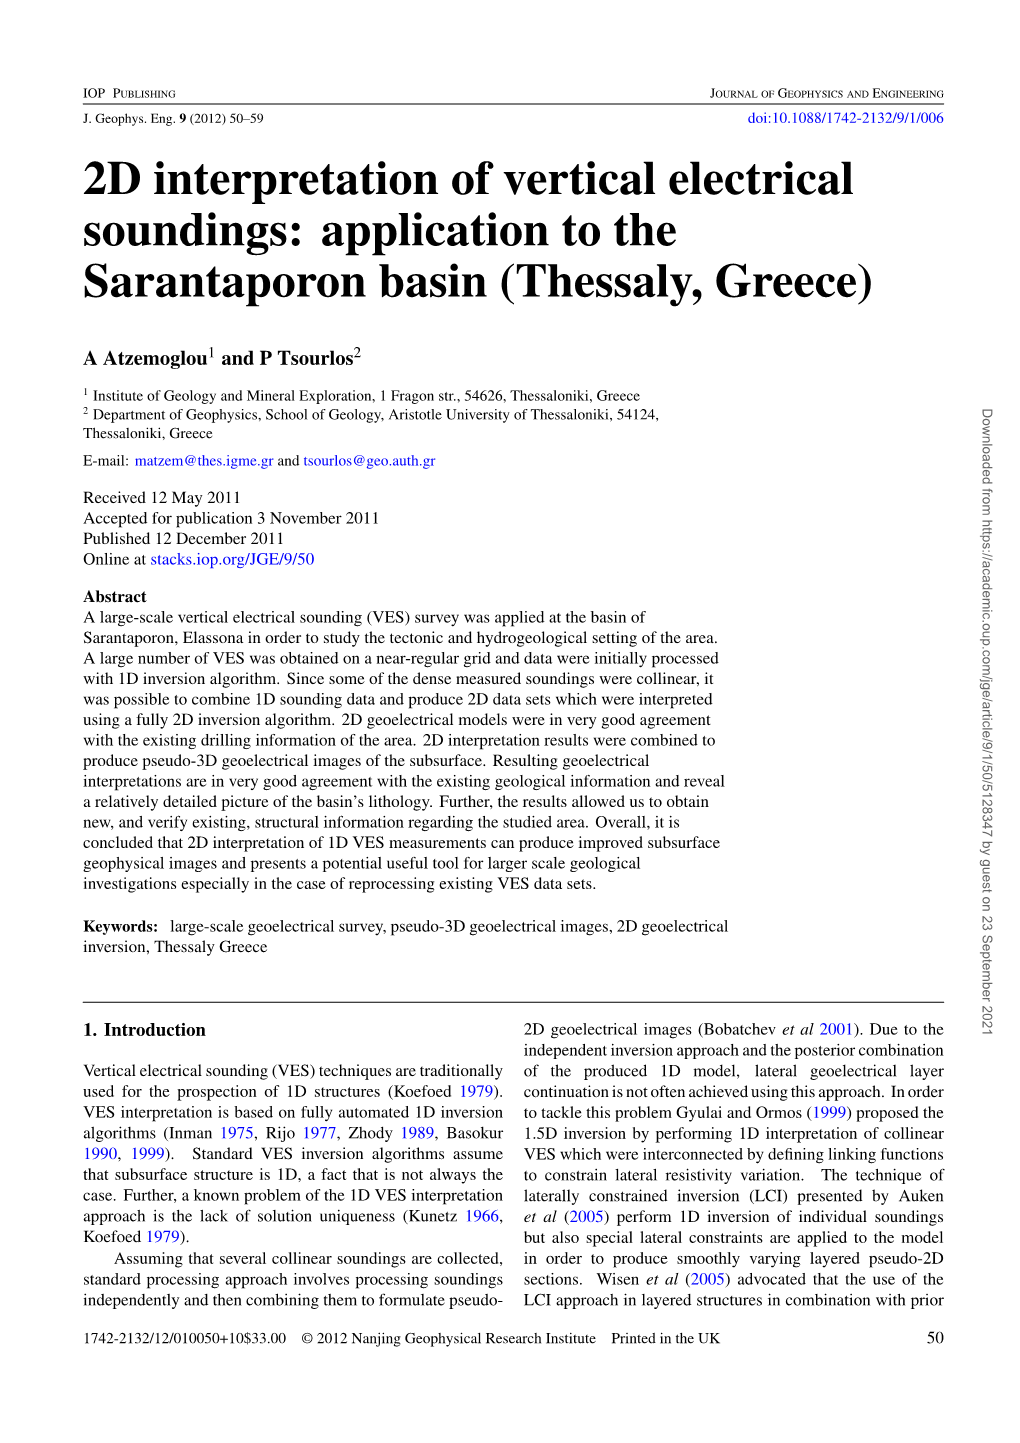 2D Interpretation of Vertical Electrical Soundings: Application to the Sarantaporon Basin (Thessaly, Greece)